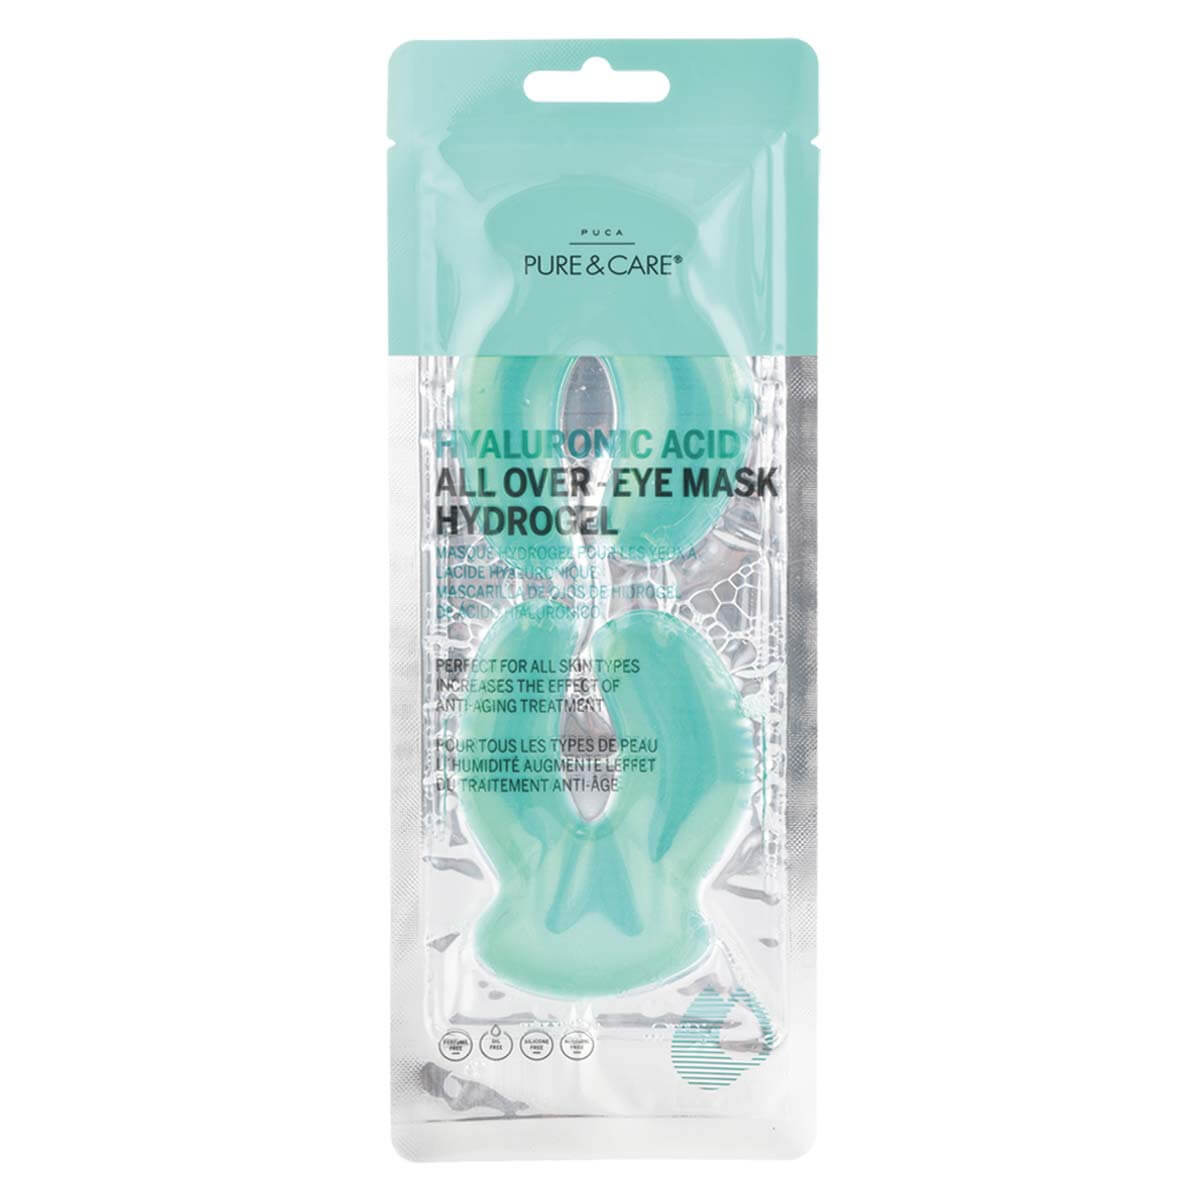 Hyaluronic Acid All Over Eye Mask Hydrogel | PUCA - PURE & CARE